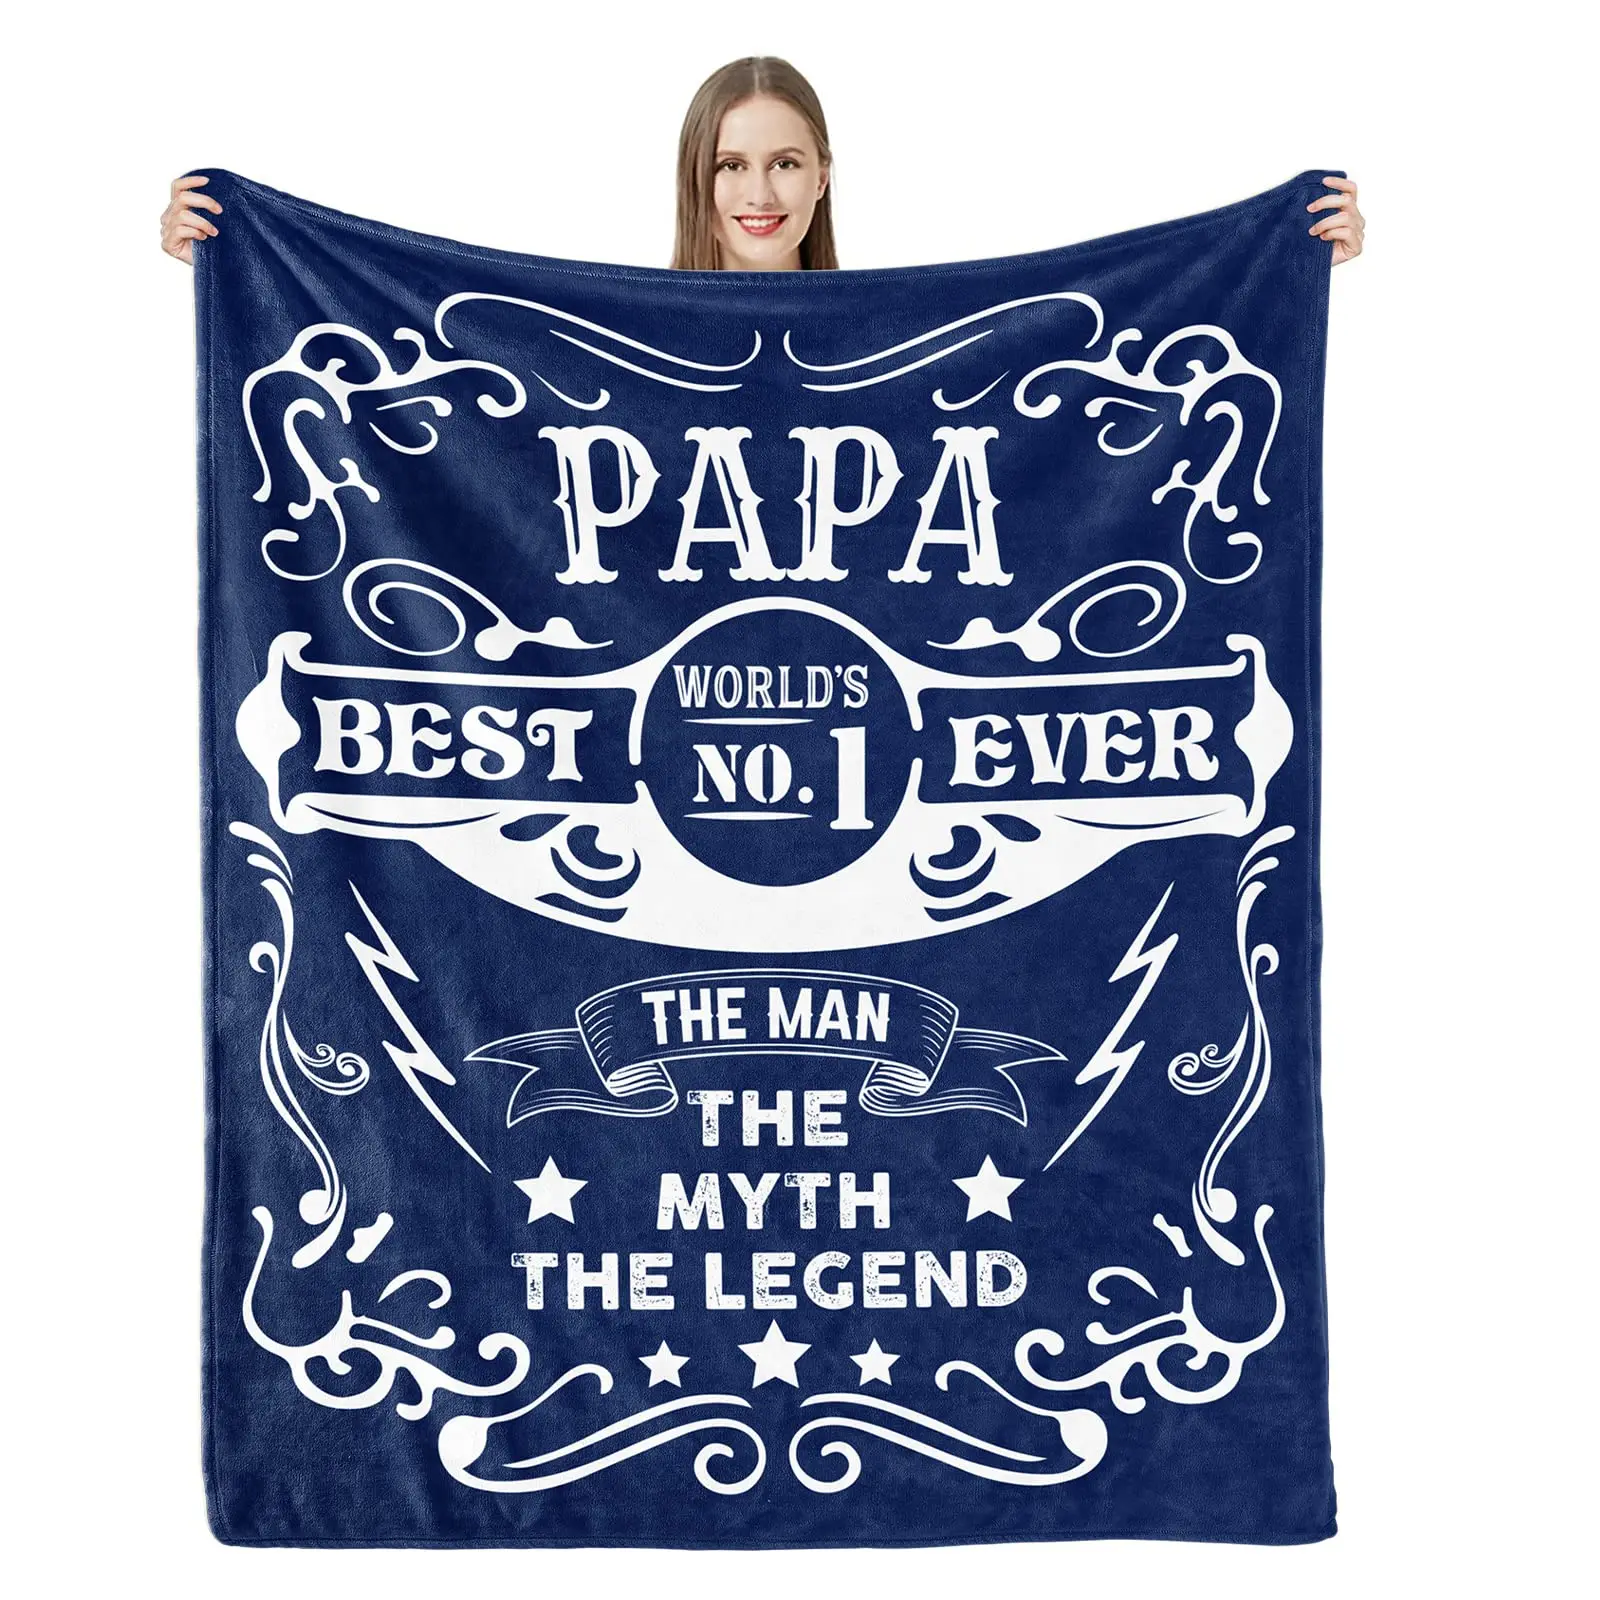 

Dad Blanket The Best Dad Throw Blanket Soft Warm for Father Daddy Papa Pappy Grandpa Men Gift for Fathers Day Birthday Christmas